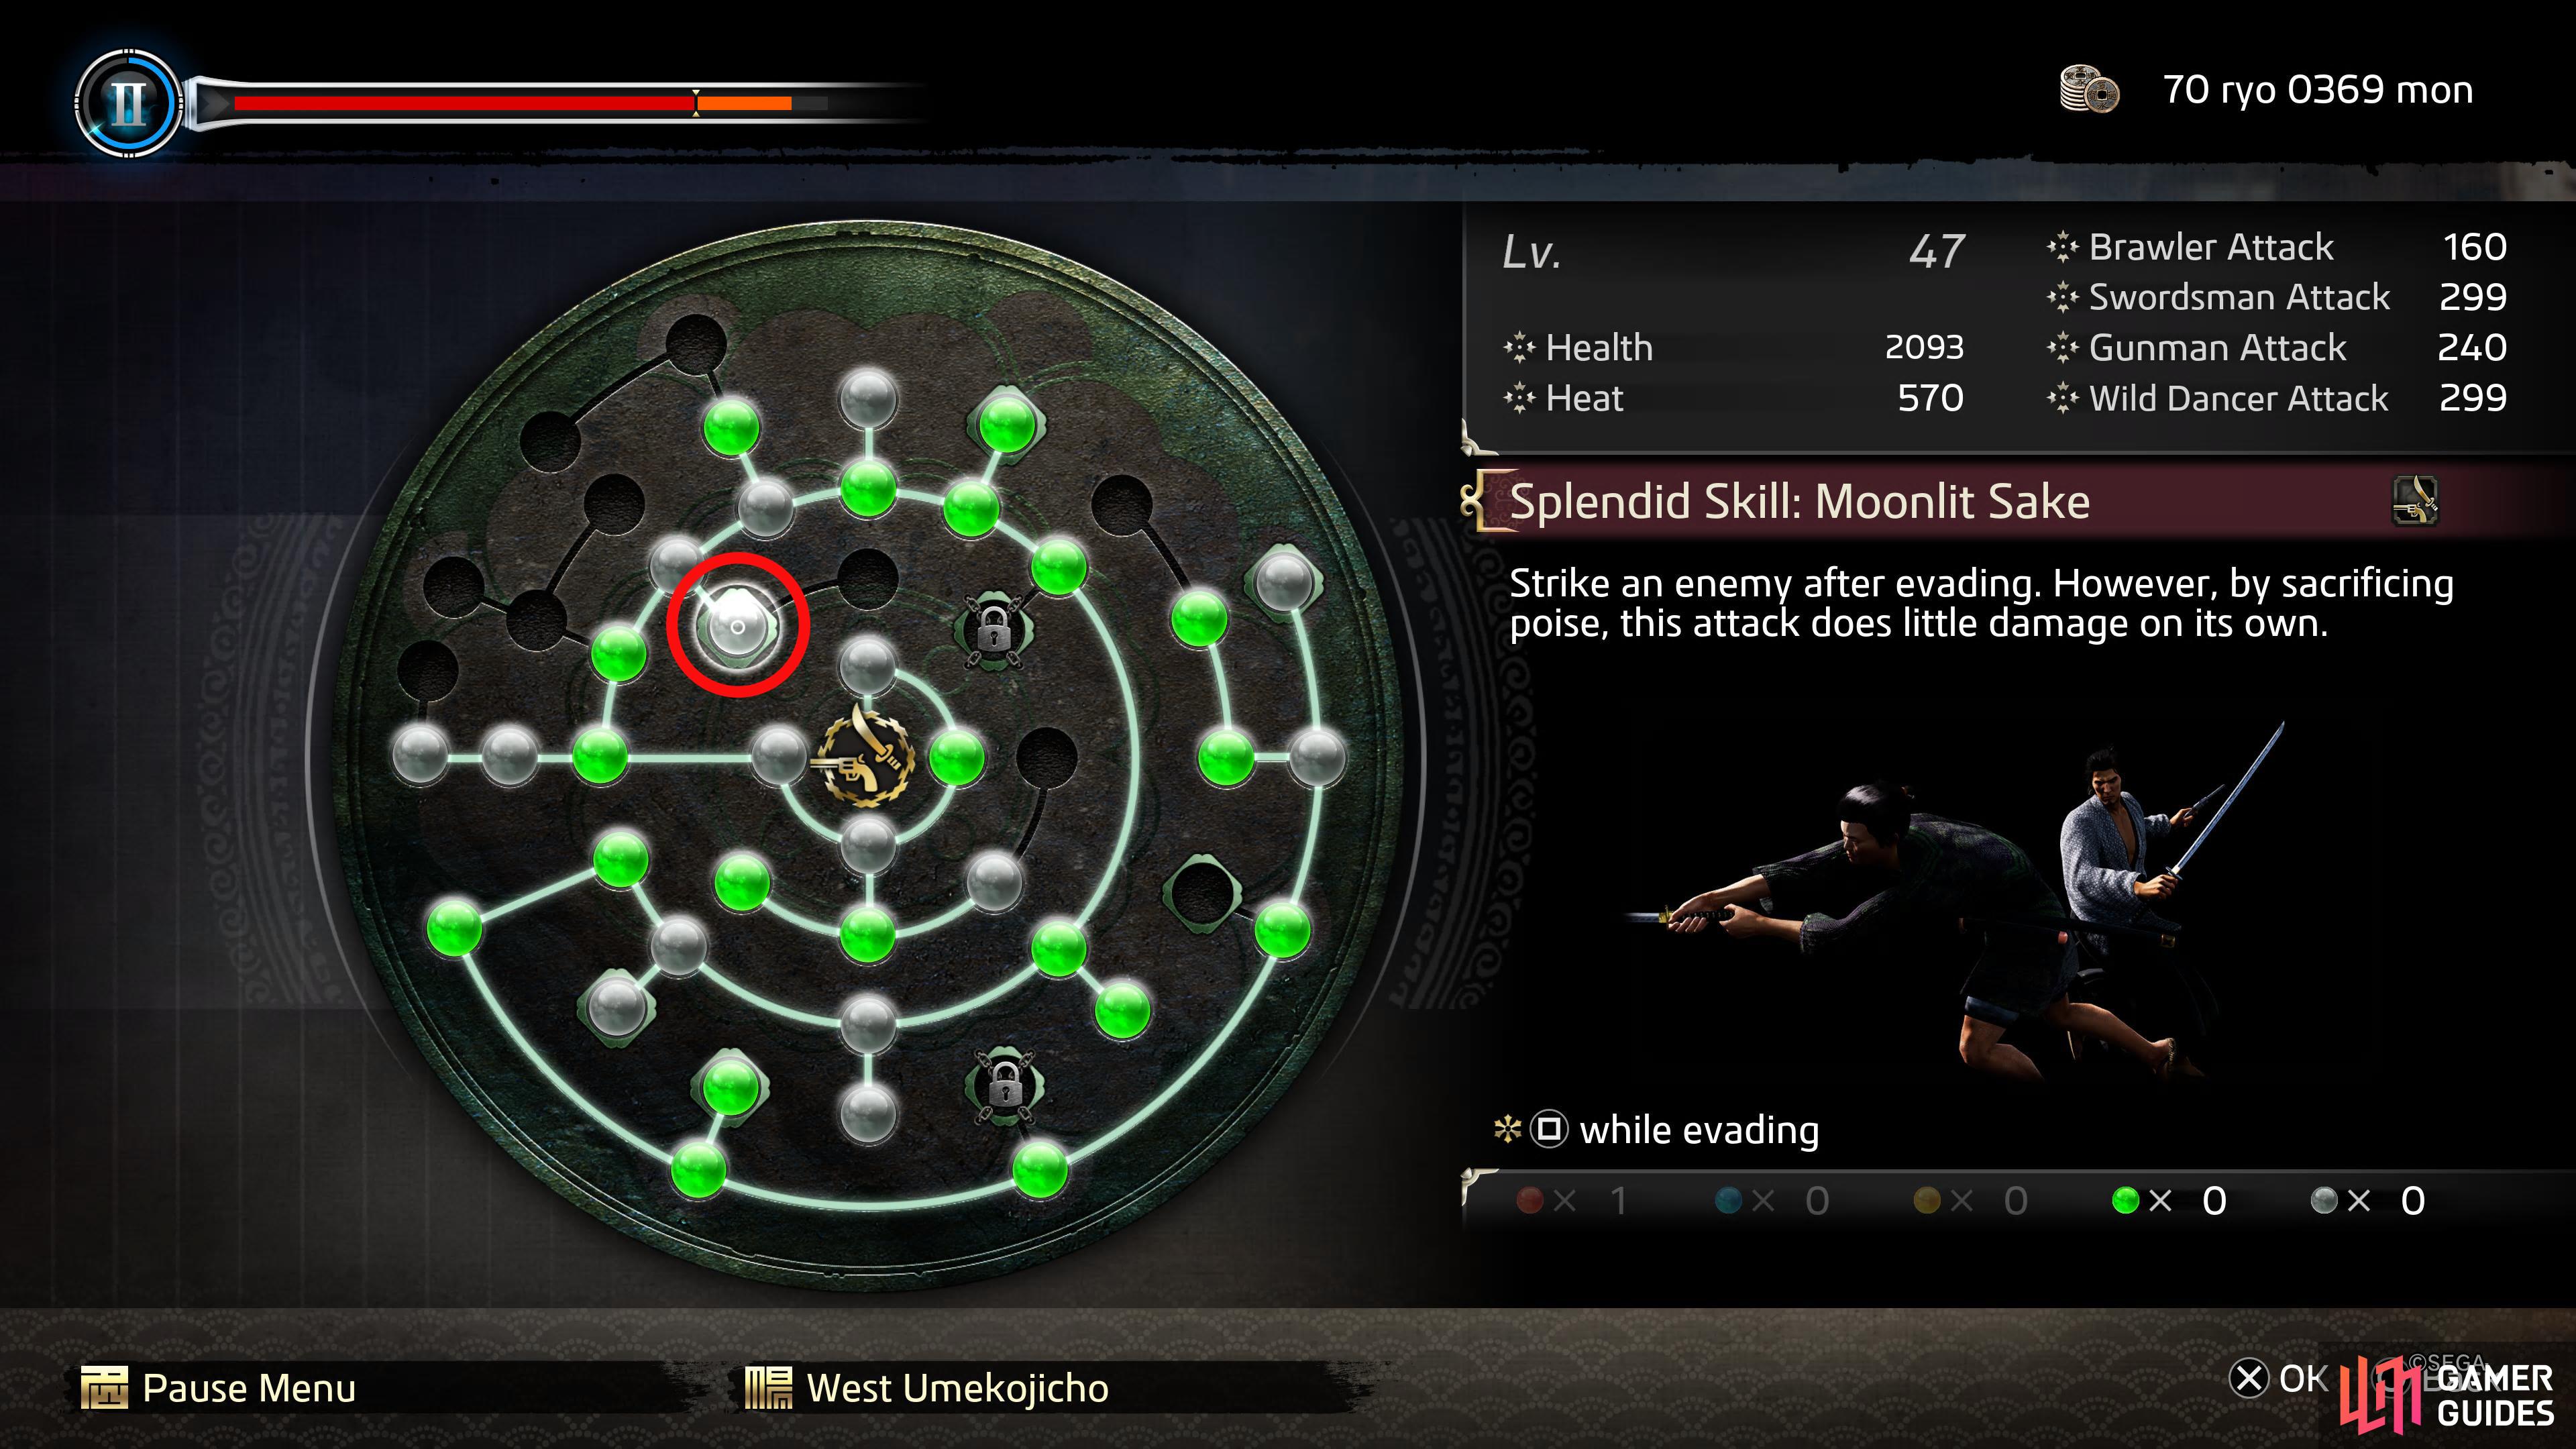 Here's where Moonlit Sake is on the Ability Wheel.